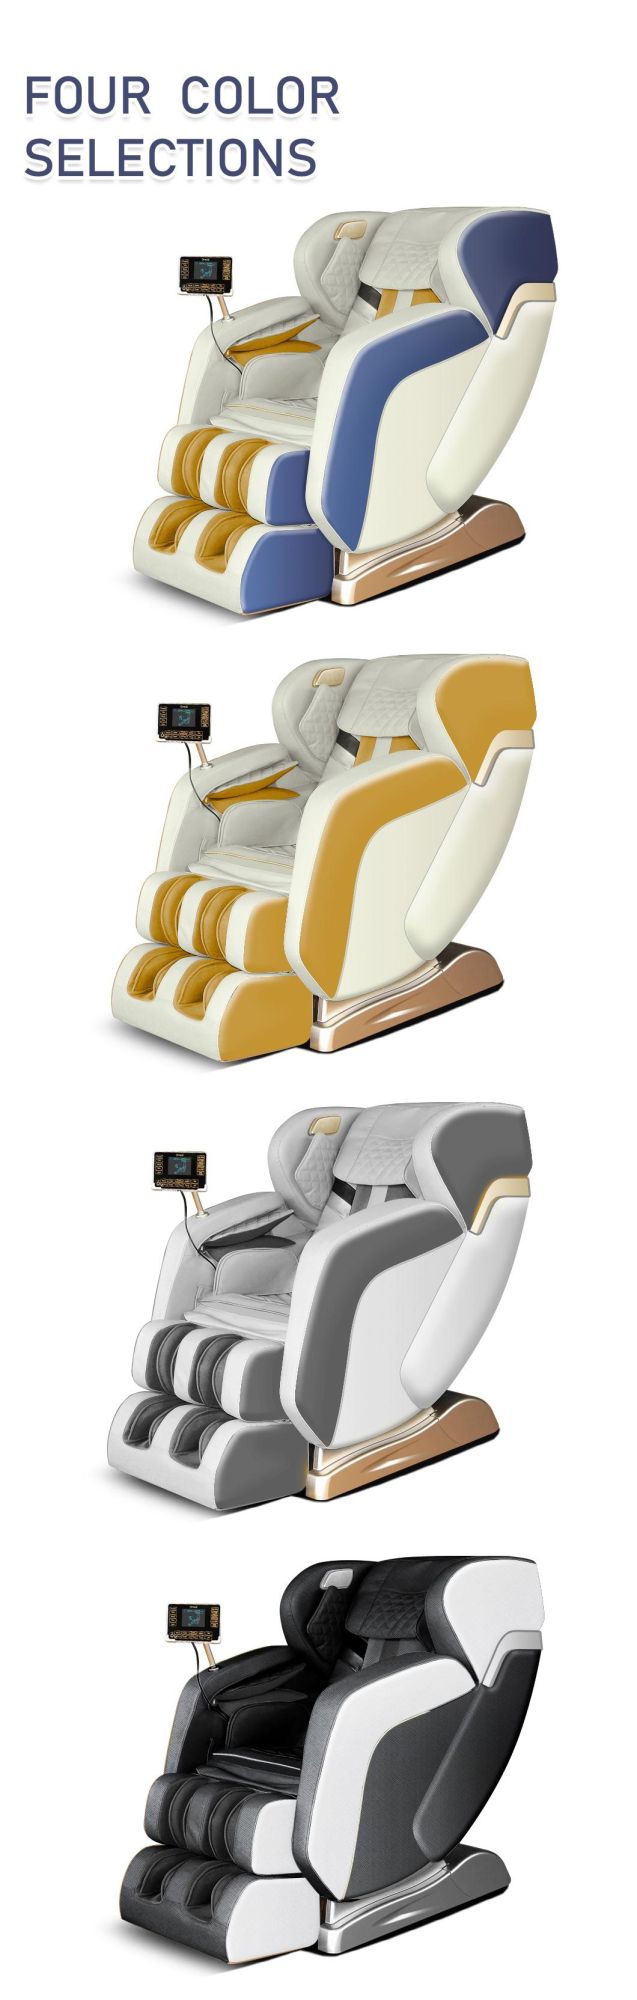 Multi Functional Luxury Massage Chair for The Body Space Capsule Intelligent Electric Sofa Chair with SL Guide Rail Manipulator